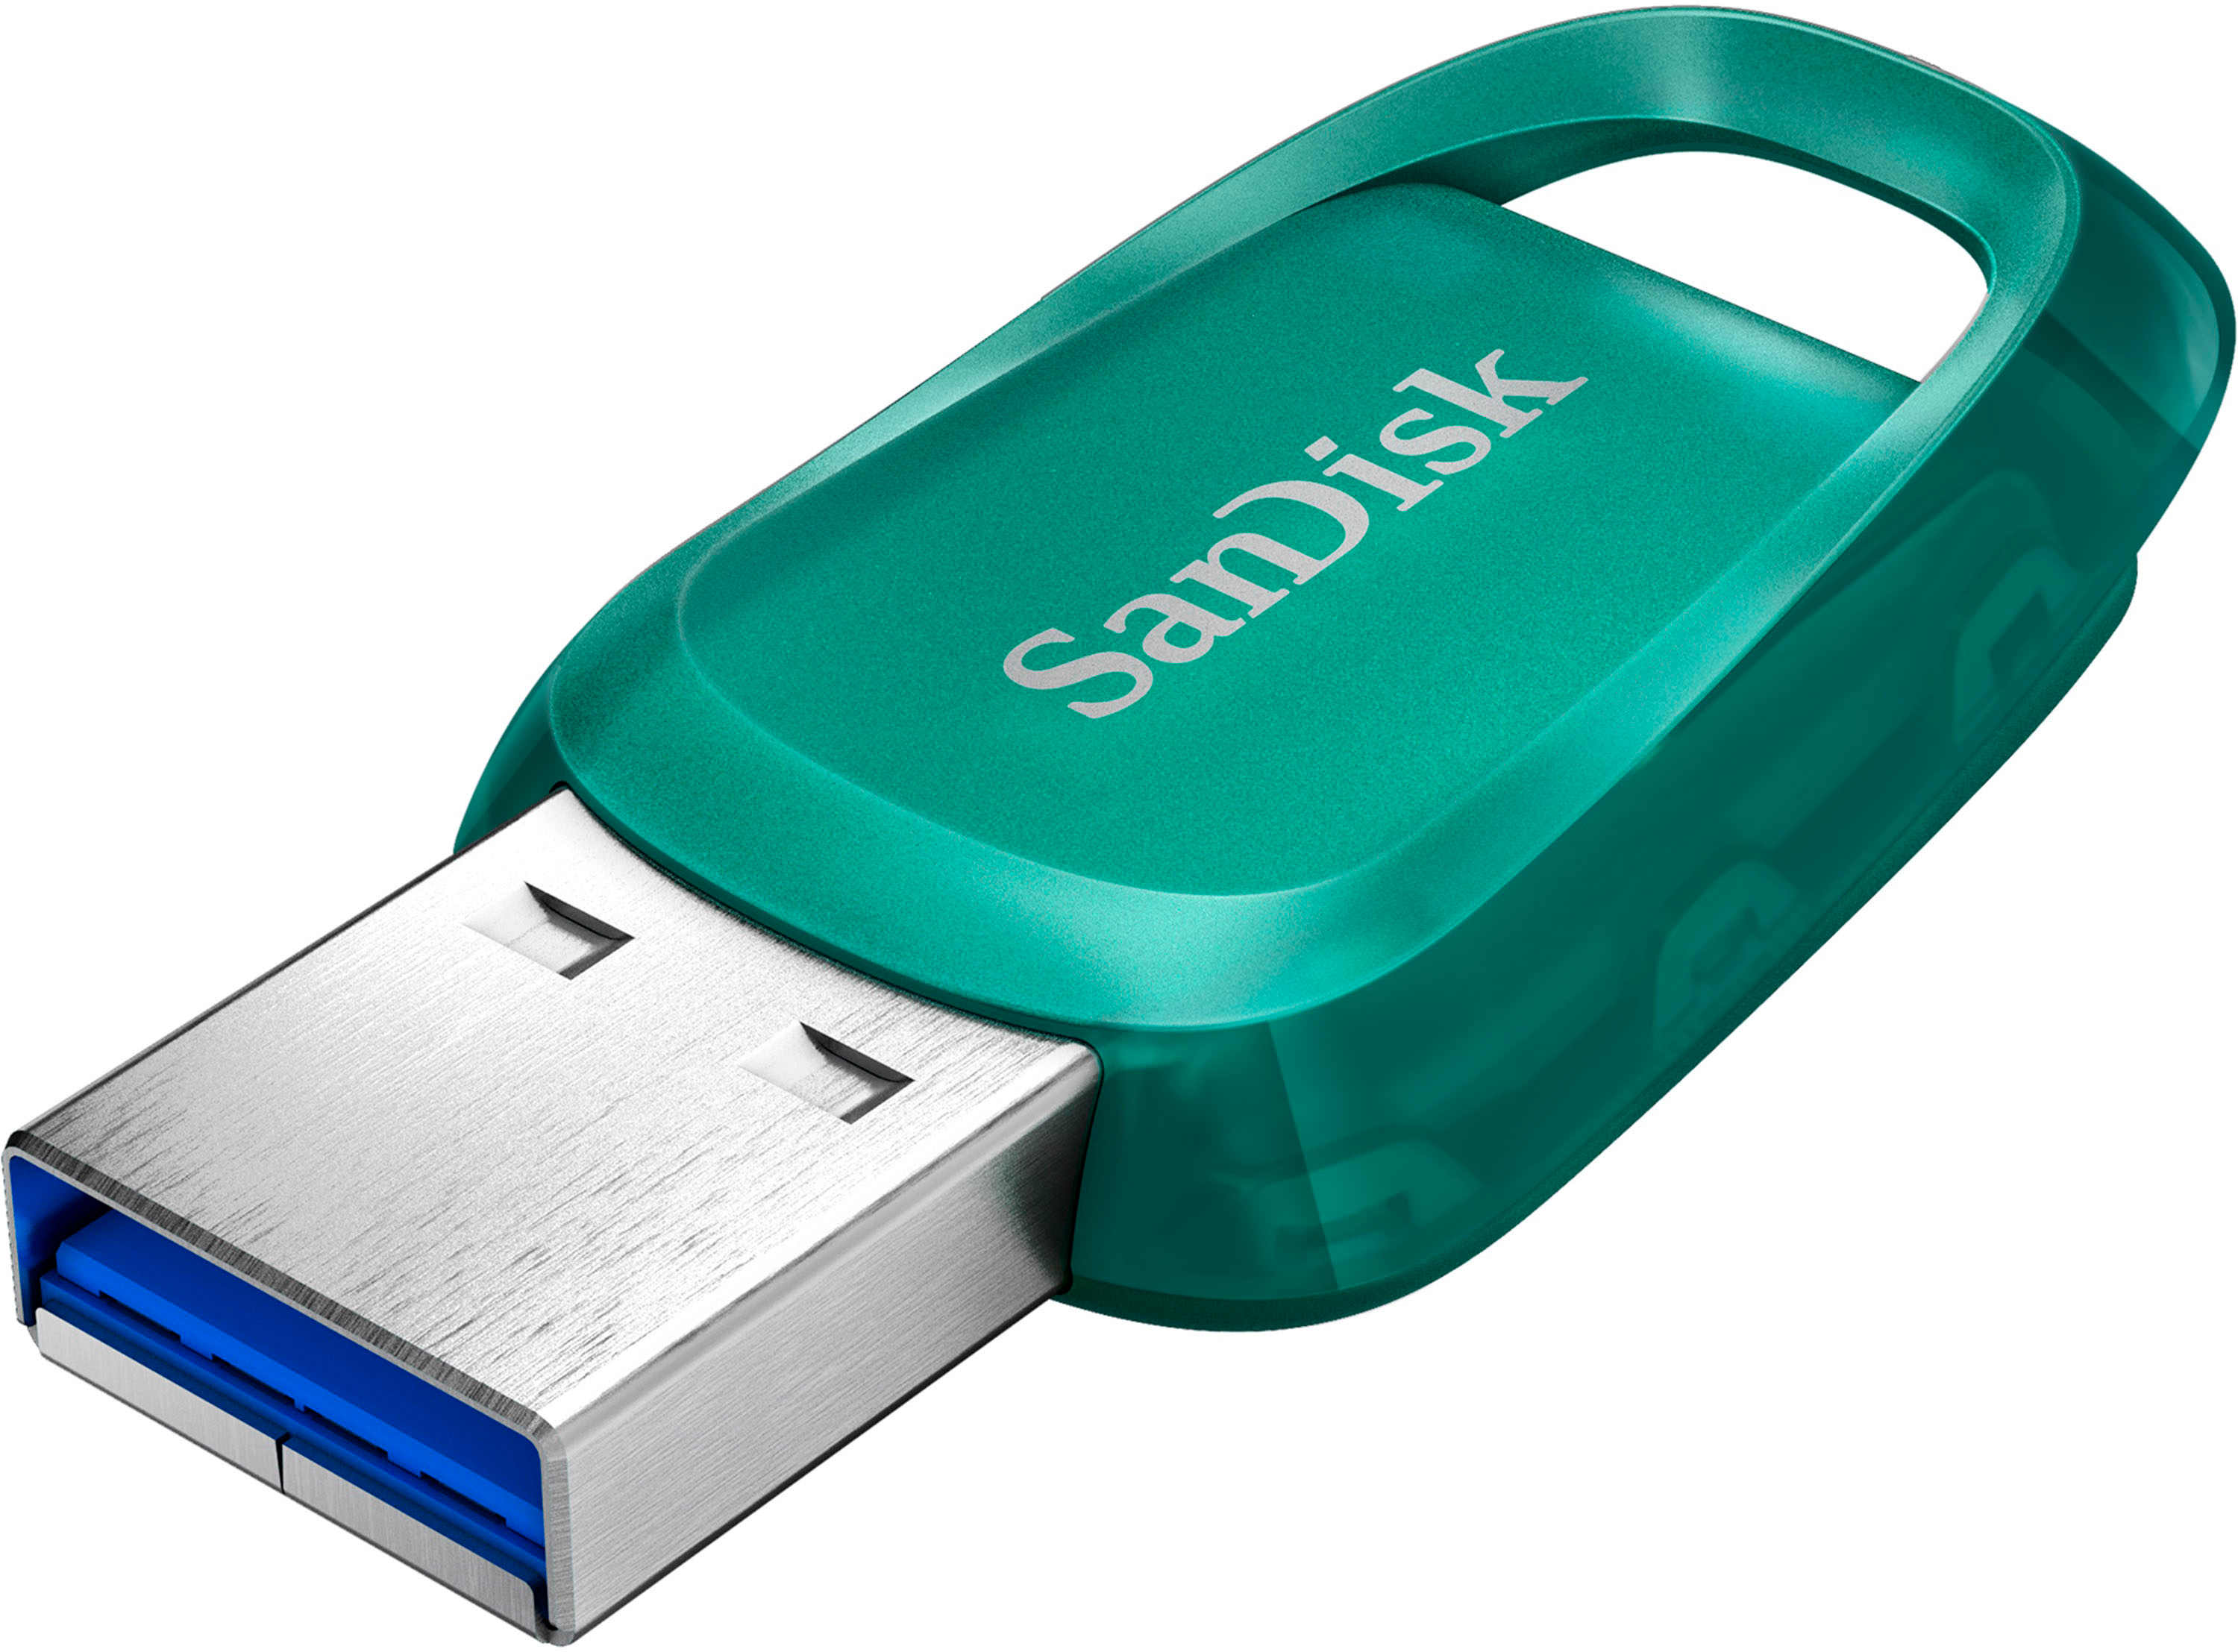 SanDisk Ultra Eco 256GB USB 3.2 1 Type-A Drive Green - Best Buy